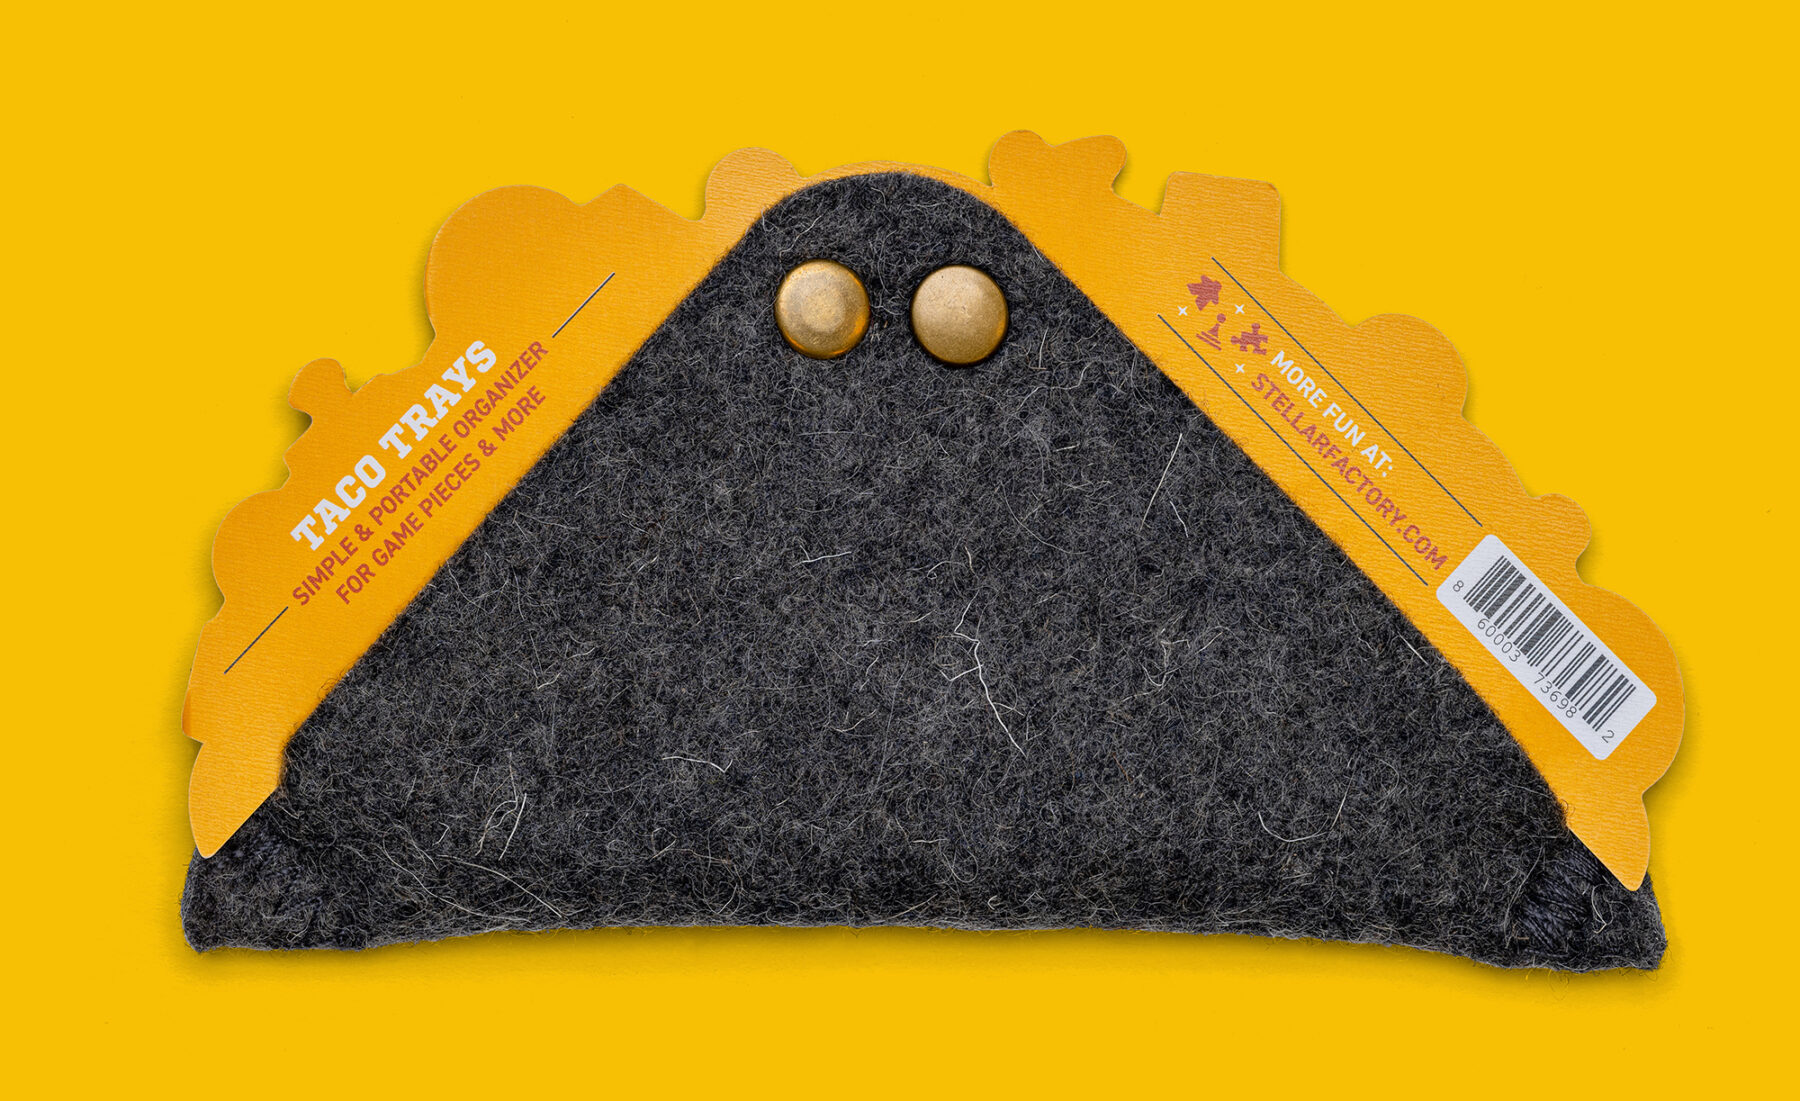 The back side of the taco tray product and packaging featuring a yellow background and text about the product.